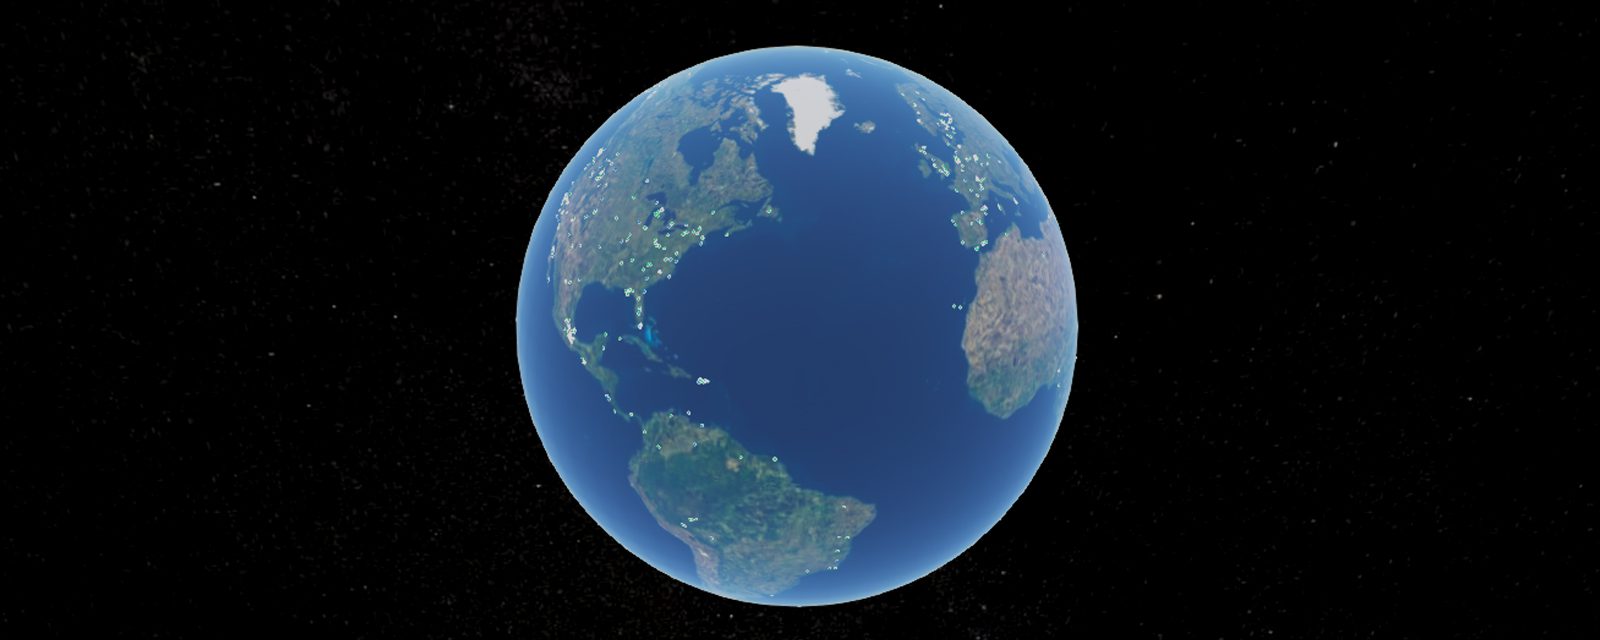 A distant view of the planet Earth